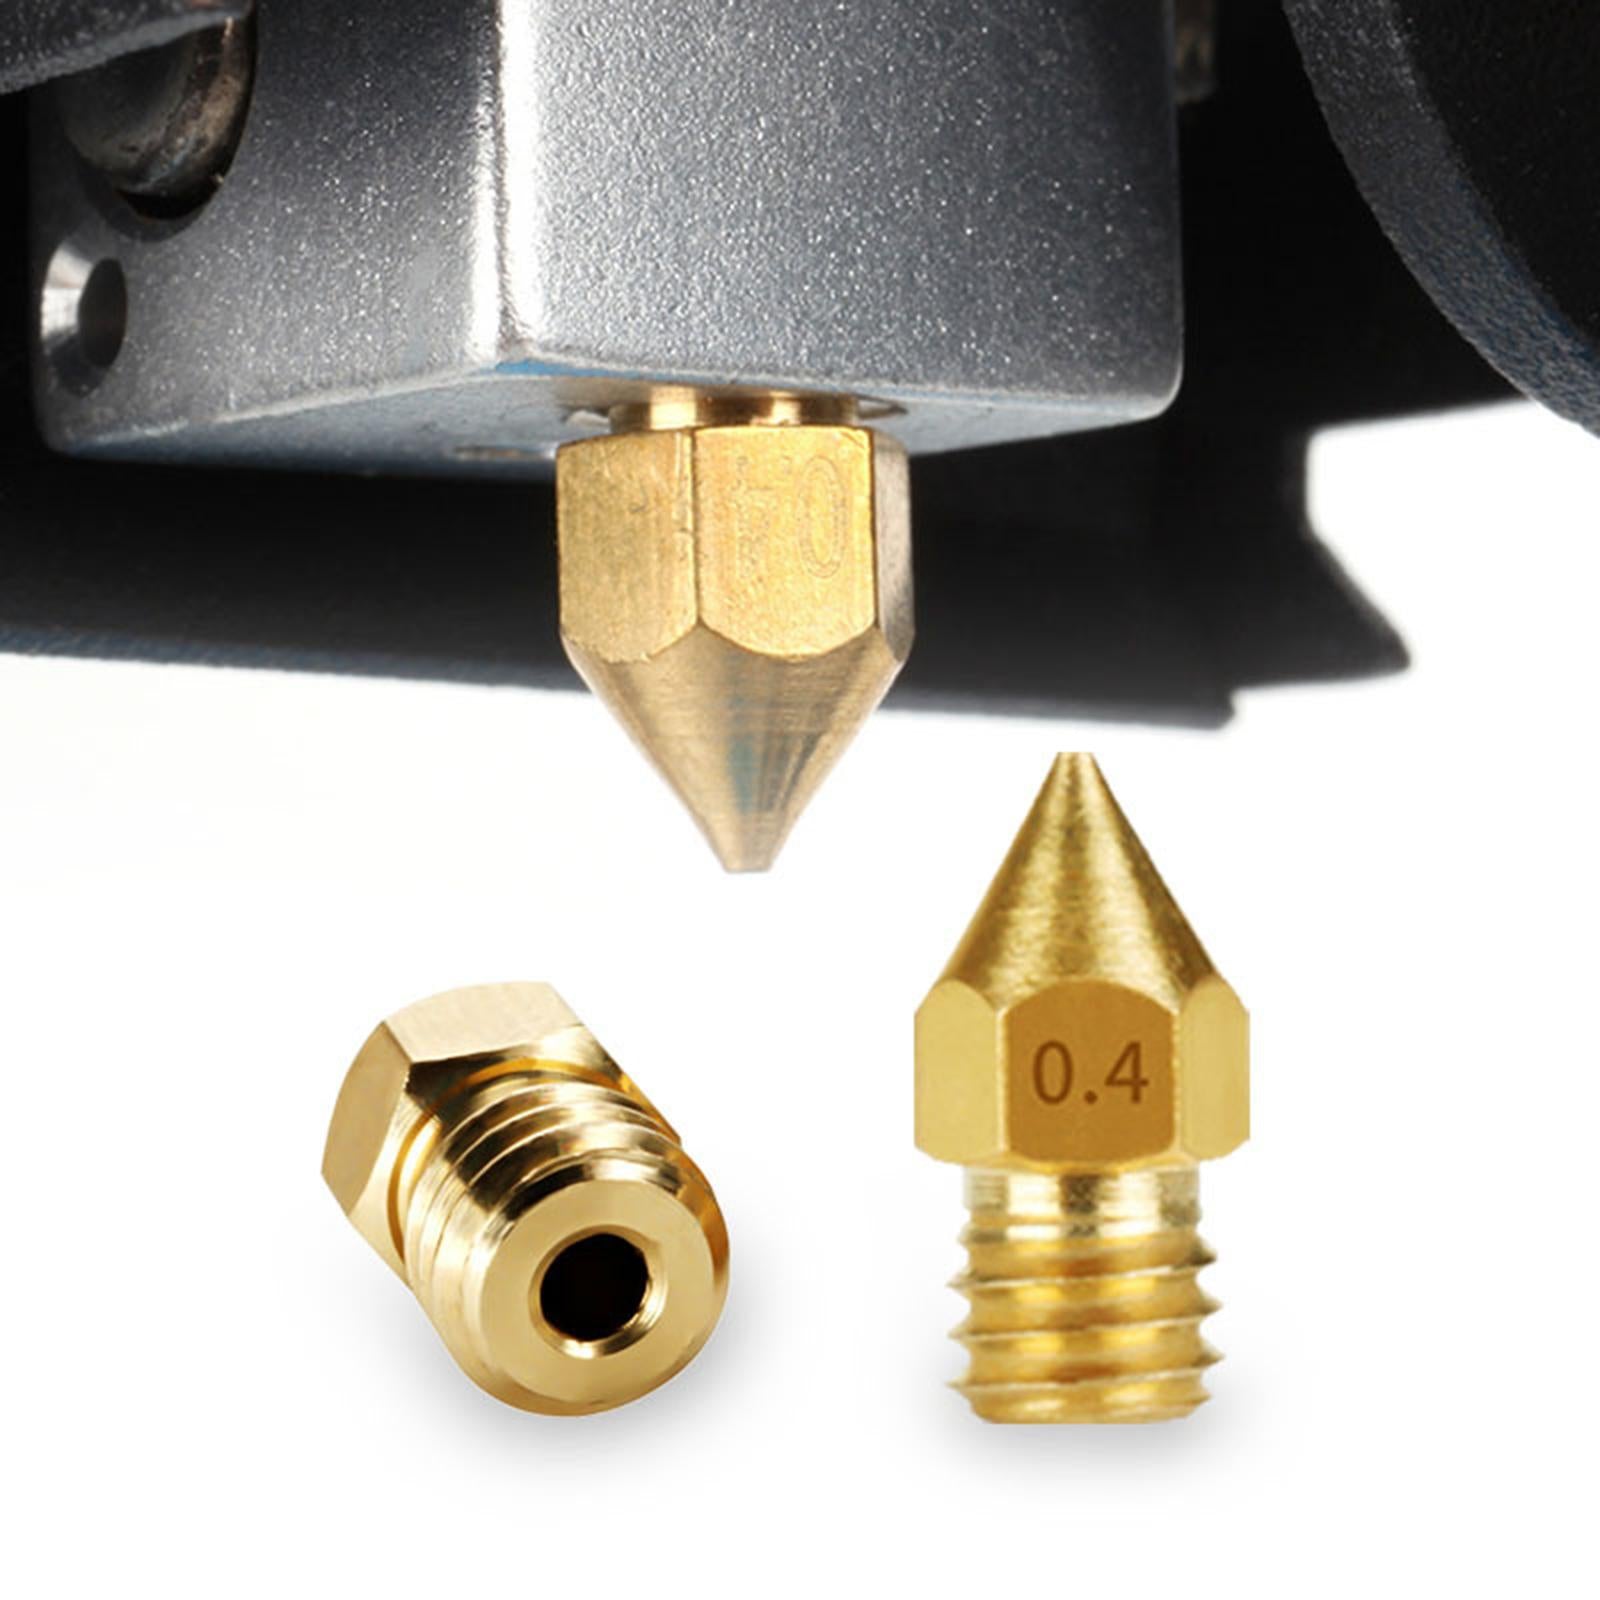 0.4Mm Mk8 3D Printer Extruder Nozzle Cleaning Tool for CR-10 Ender2 Ender 3